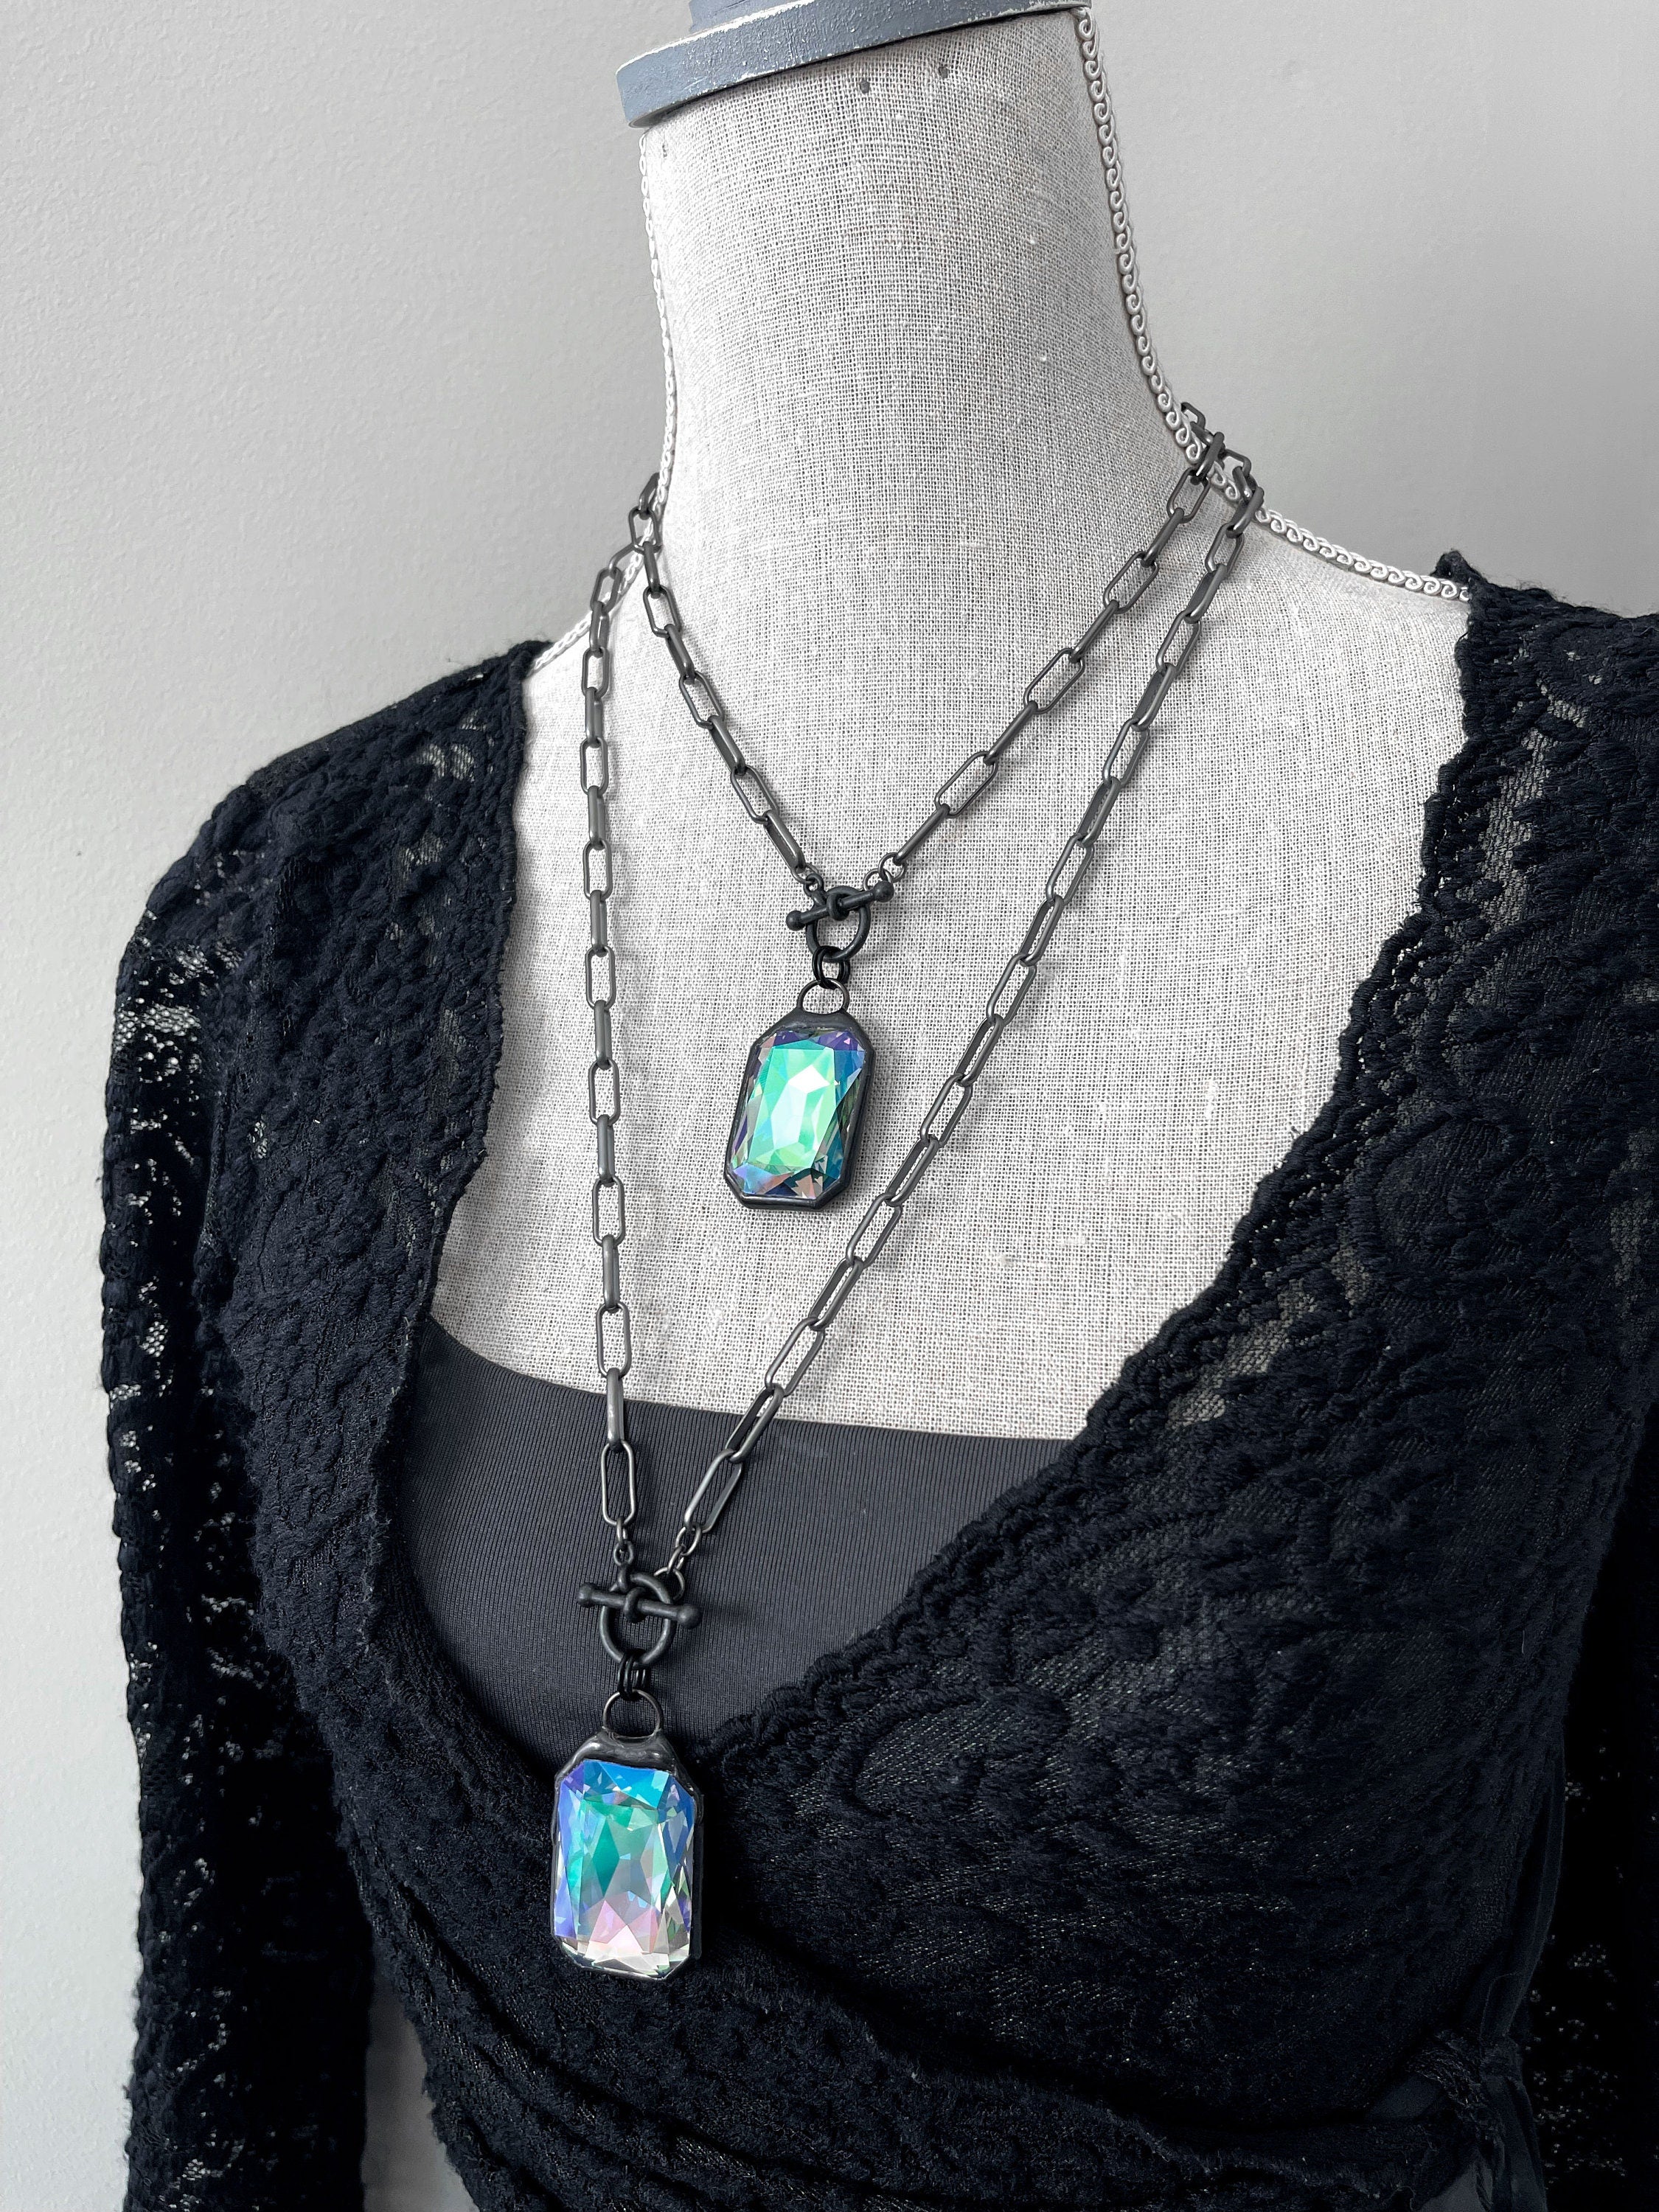 WIZARD - Shimmer Crystal Pendant Necklace - Green, Purple, Lilac, Pink Iridescent - Witchy Woman Cosplay, Halloween Wedding Jewelry